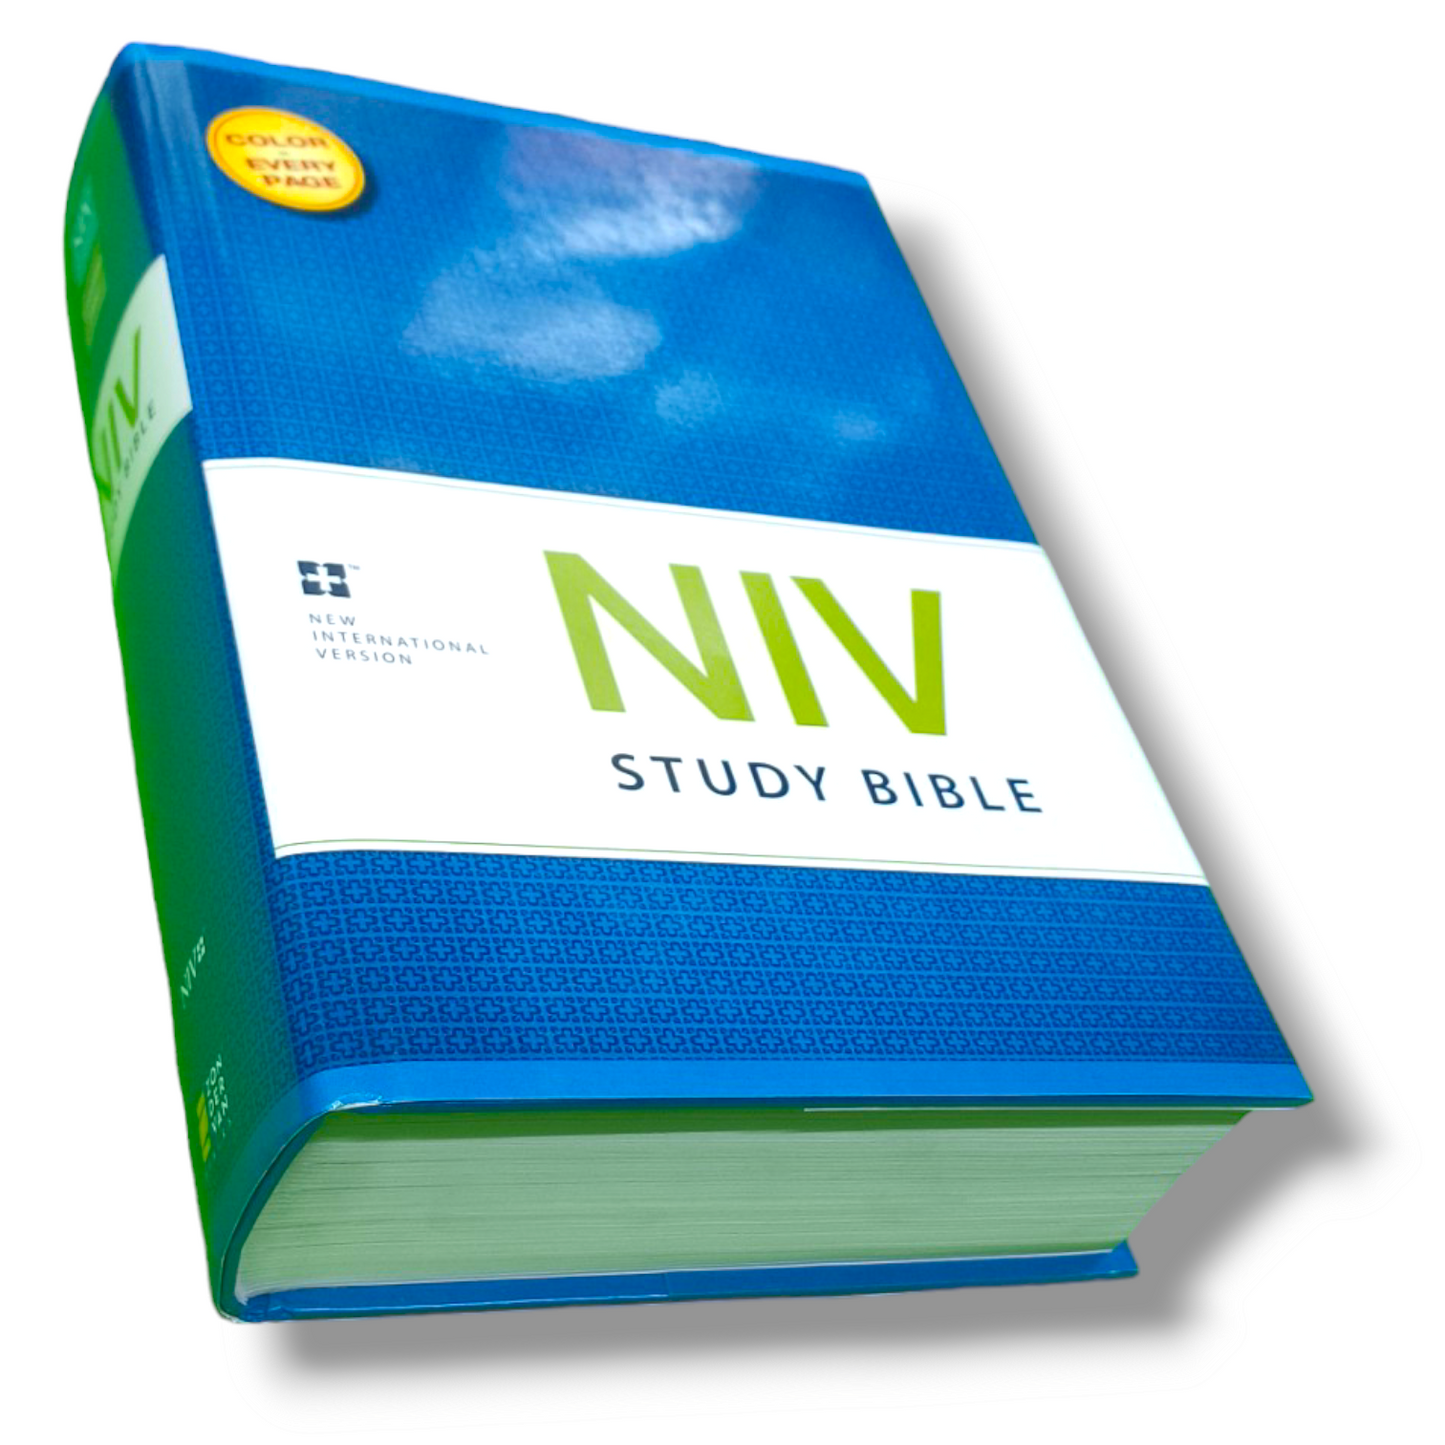 NIV Study Bible | Hard Bound Edition | Large Print | With Related Picture's | New Edition